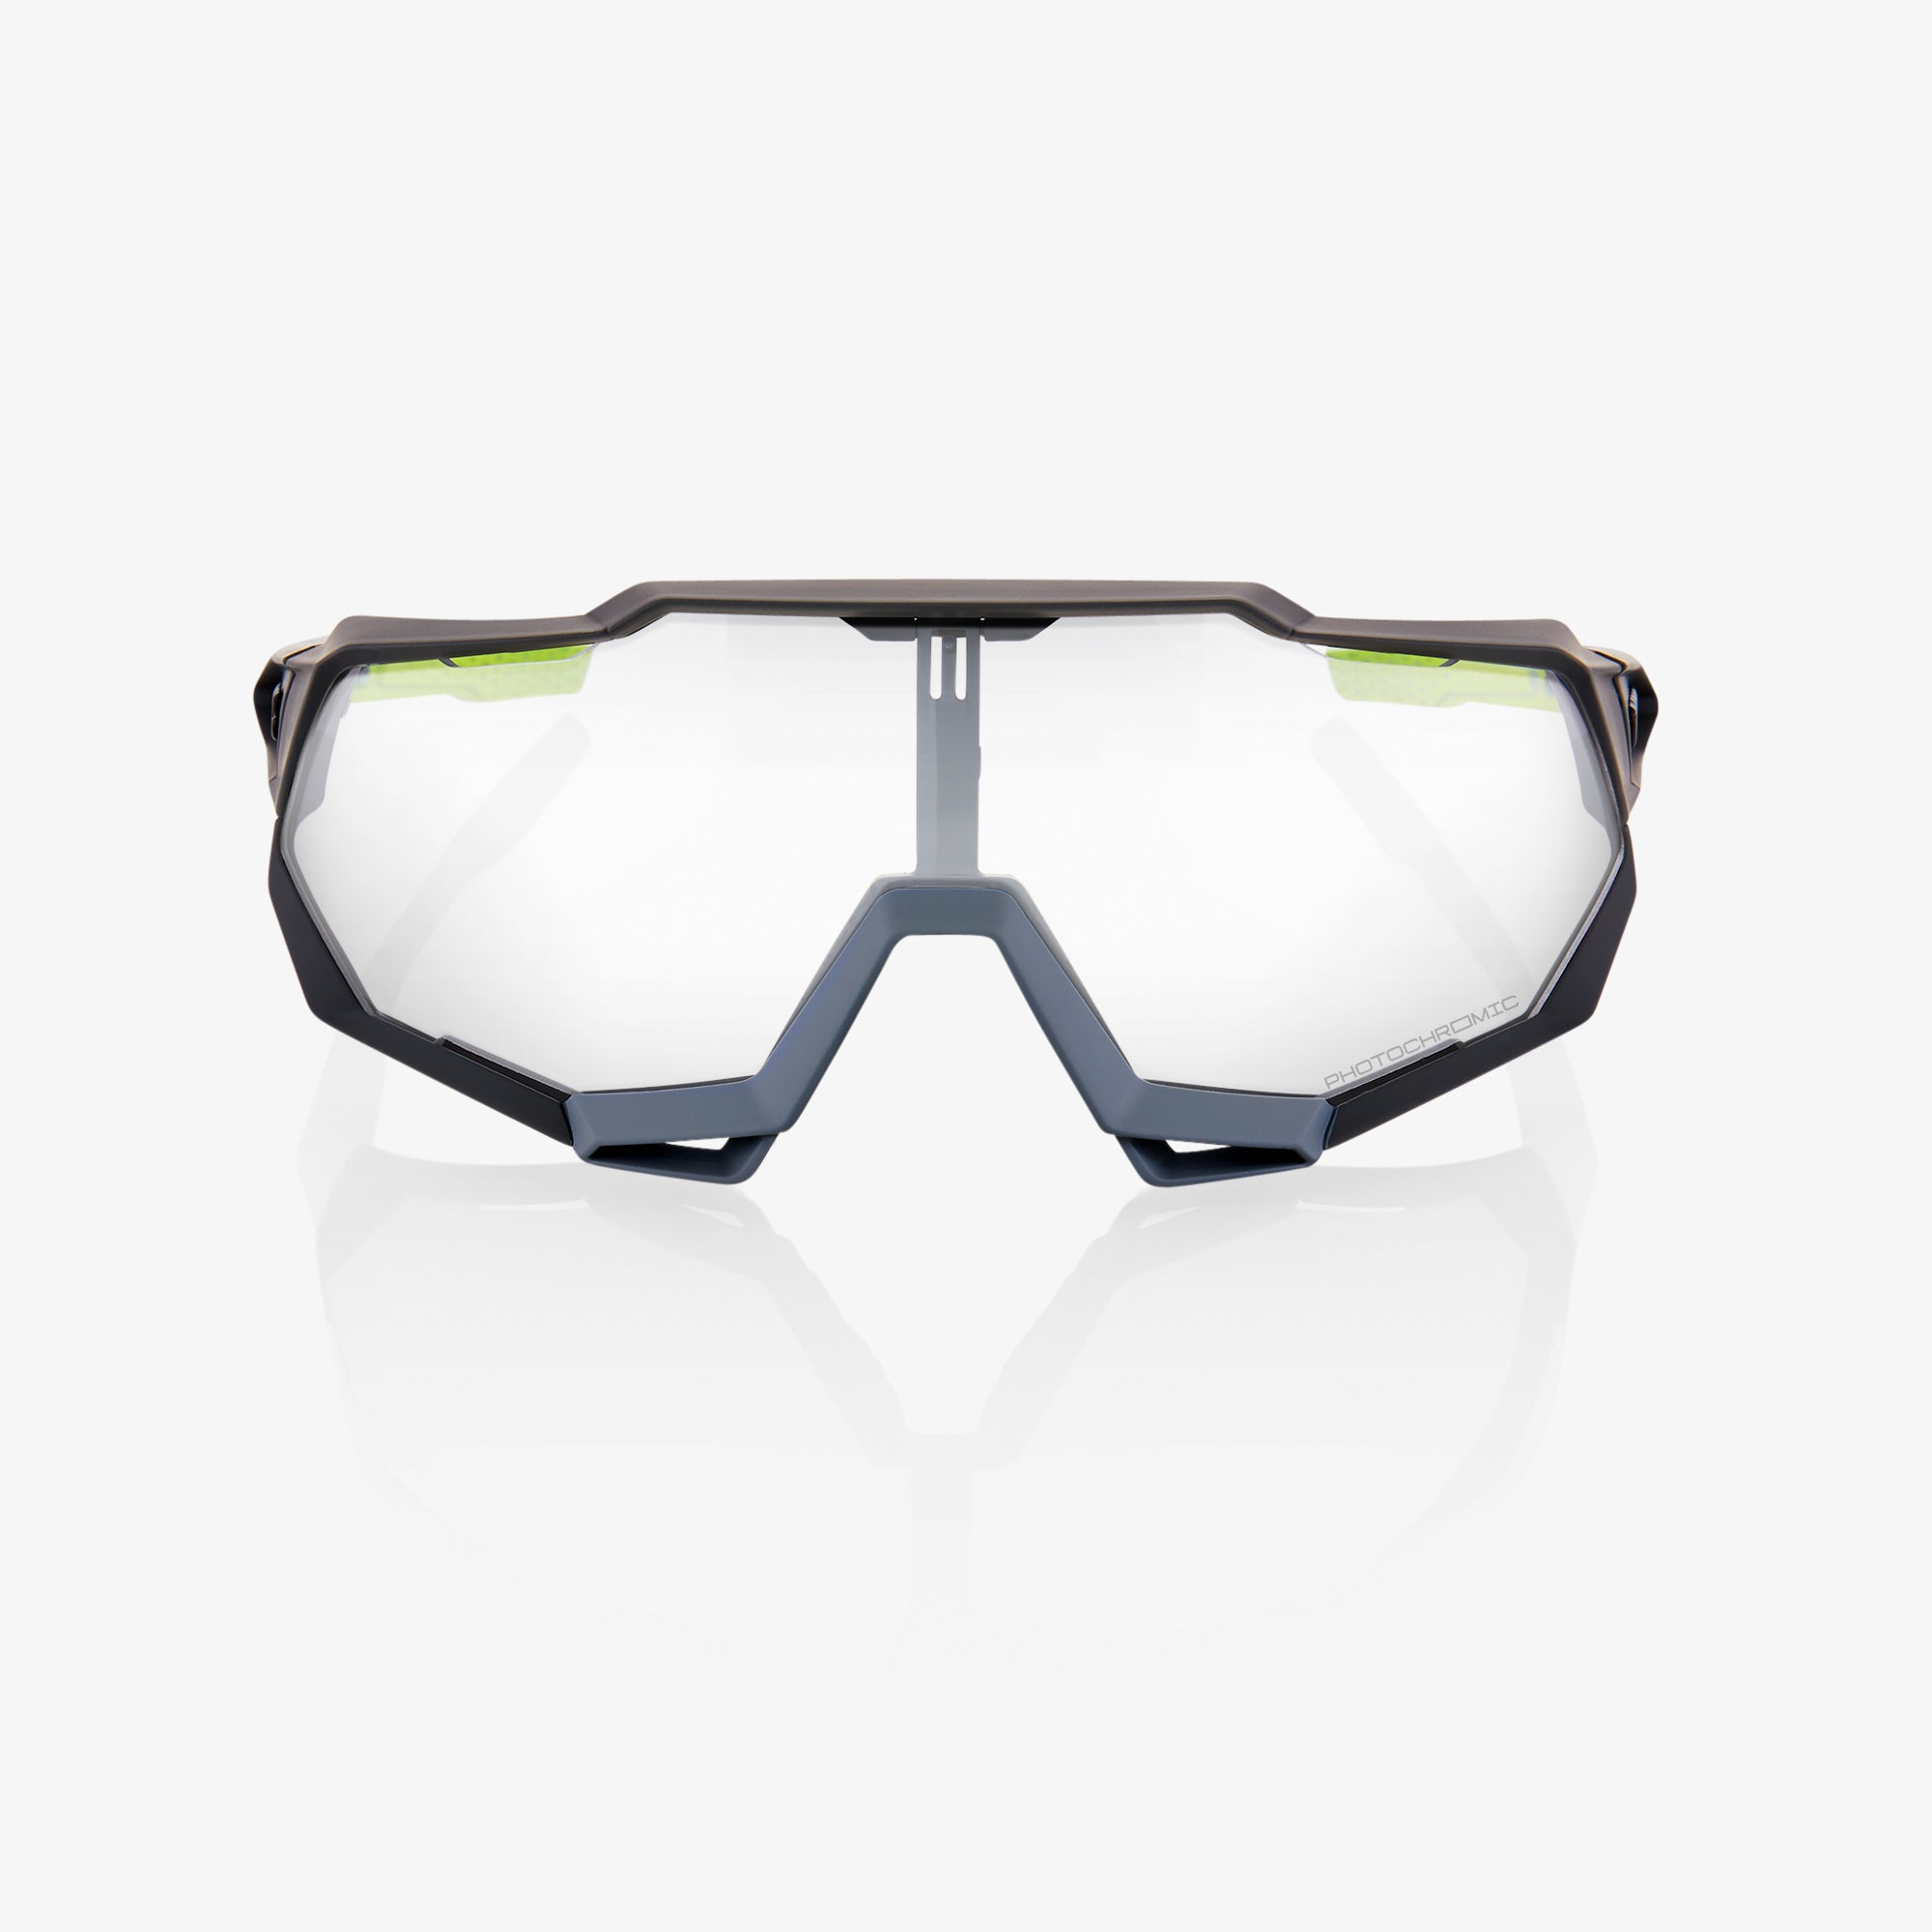 SPEEDTRAP - Soft Tact Cool Grey - Photochromic Lens - Secondary